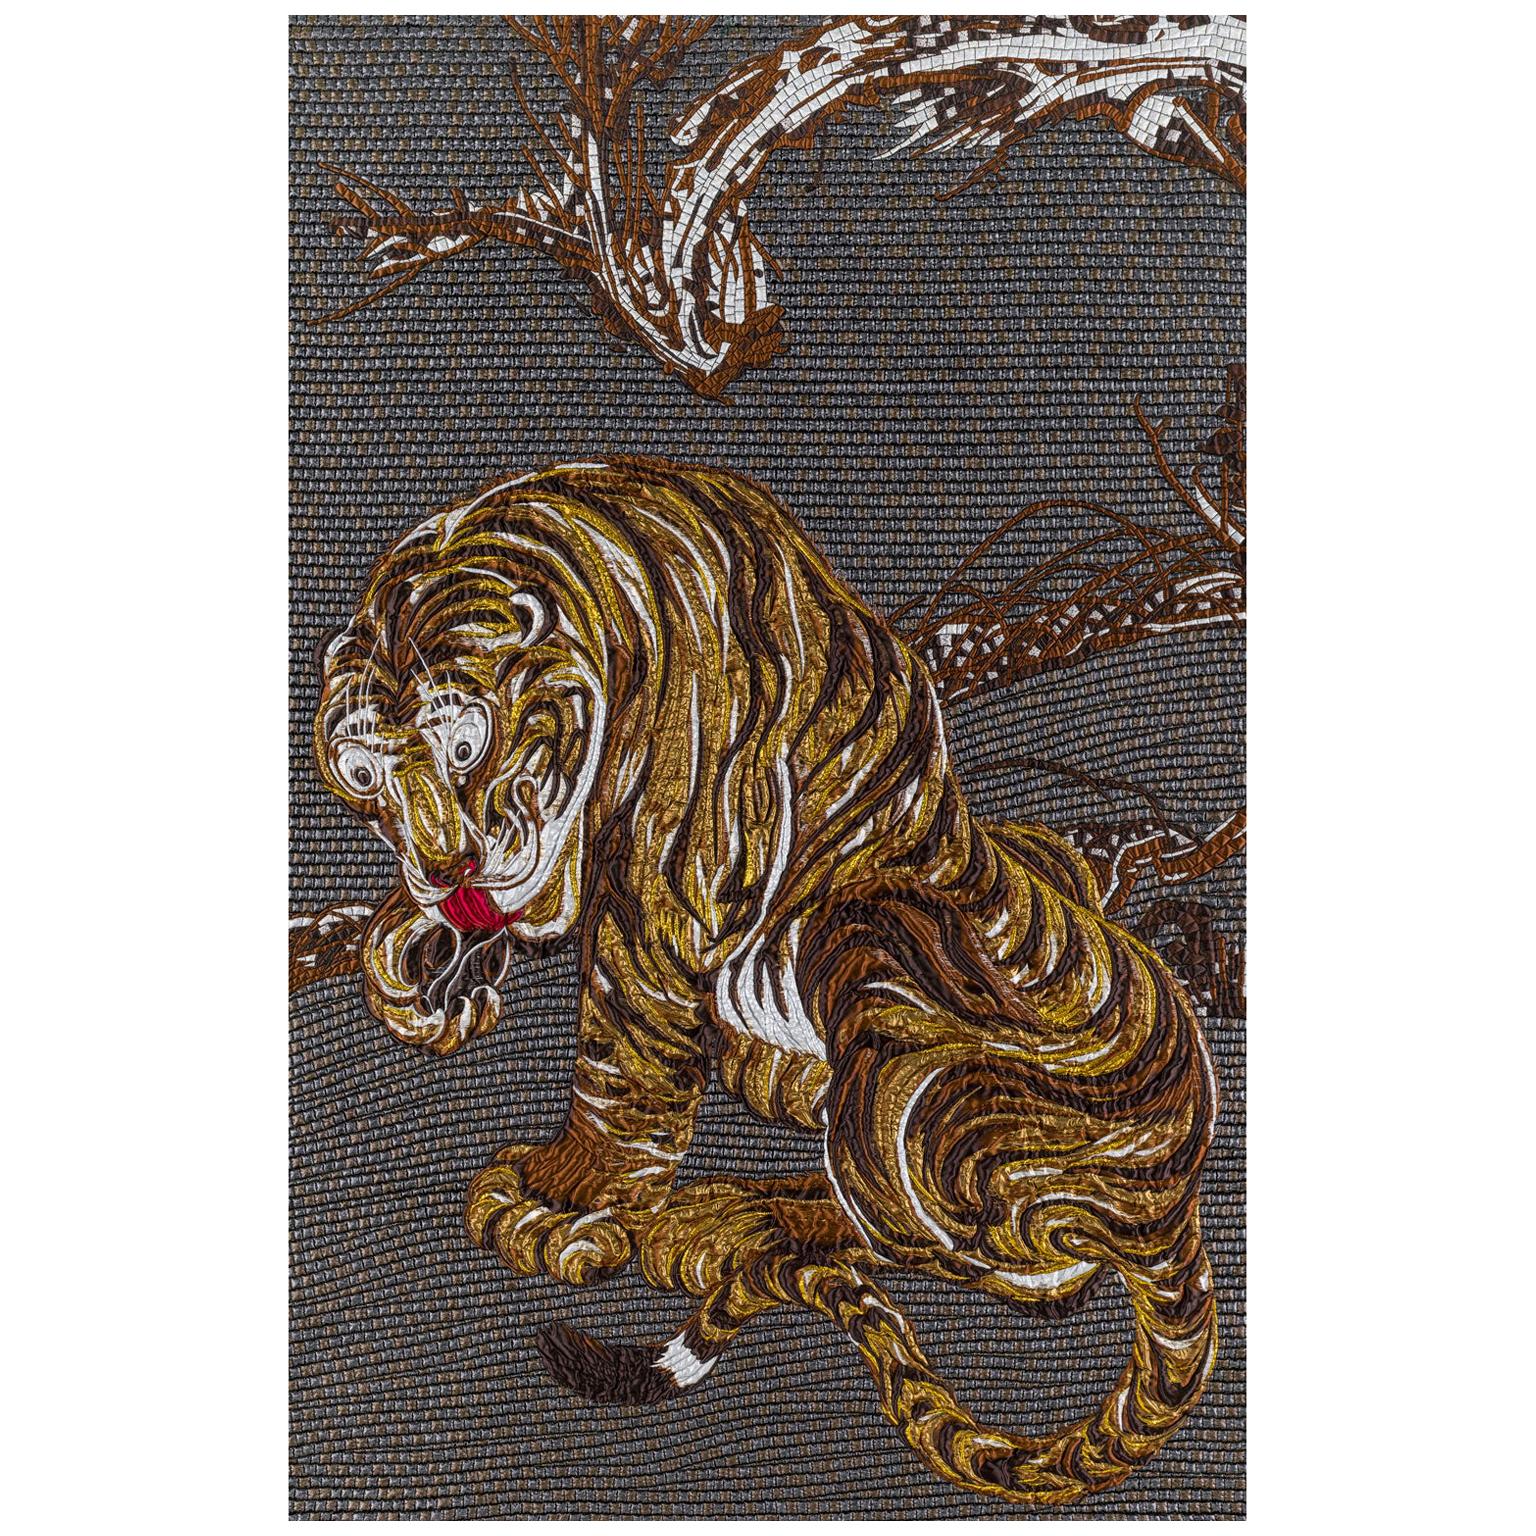 Fabric Tapestry with Tiger Design Upholstered Panel on Demand